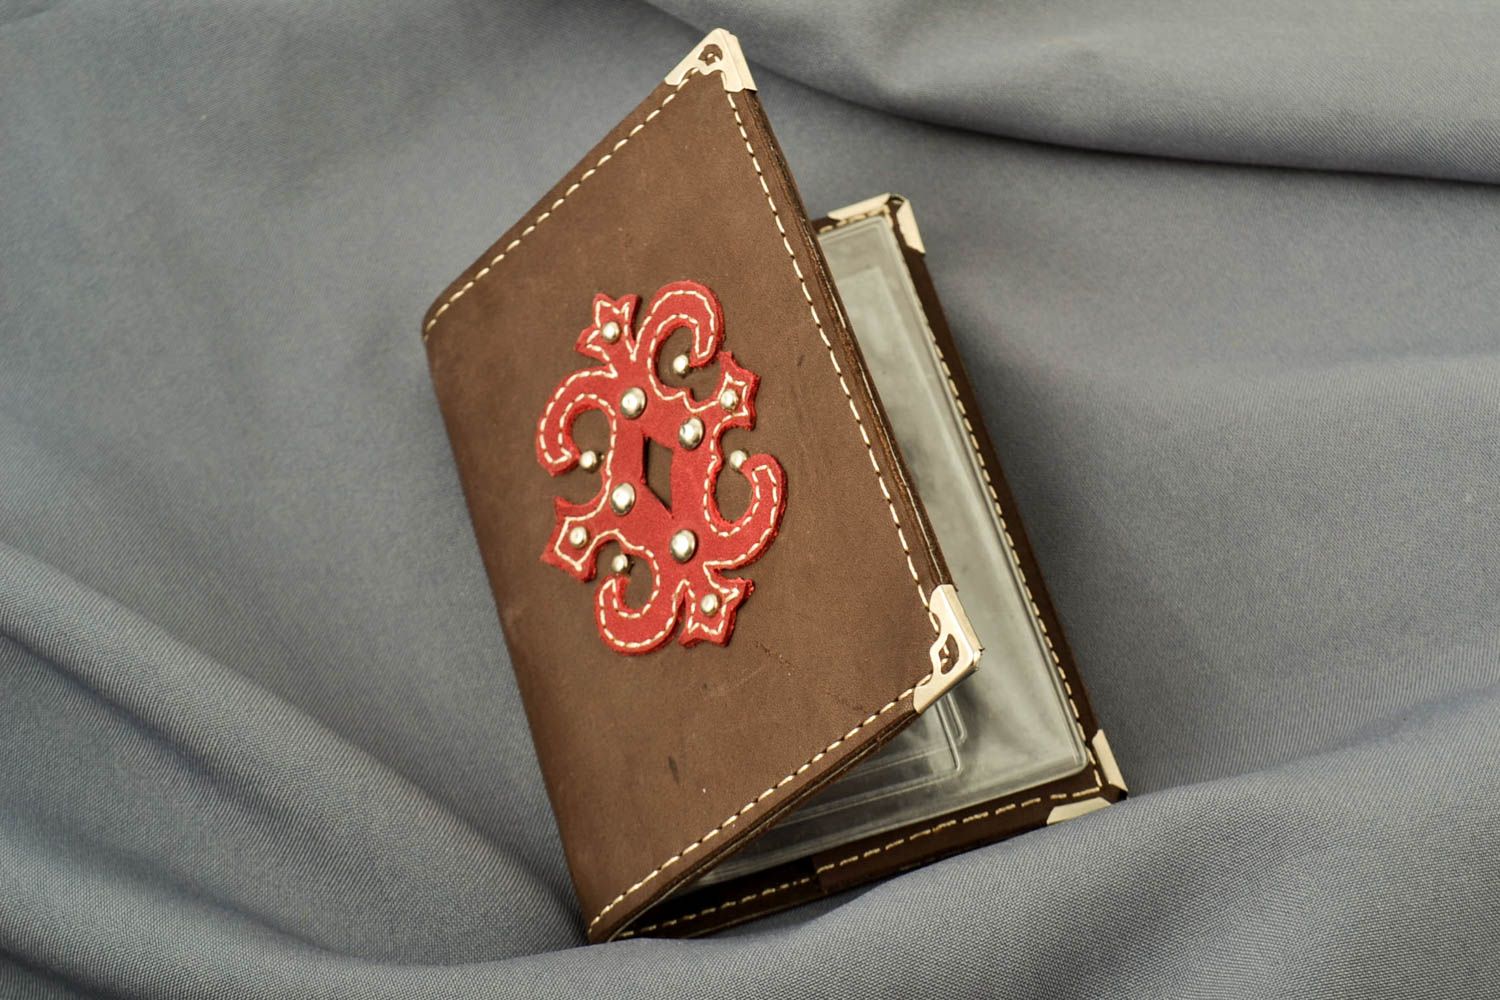 Driving license holder handmade leather goods leather accessories gifts for men photo 1